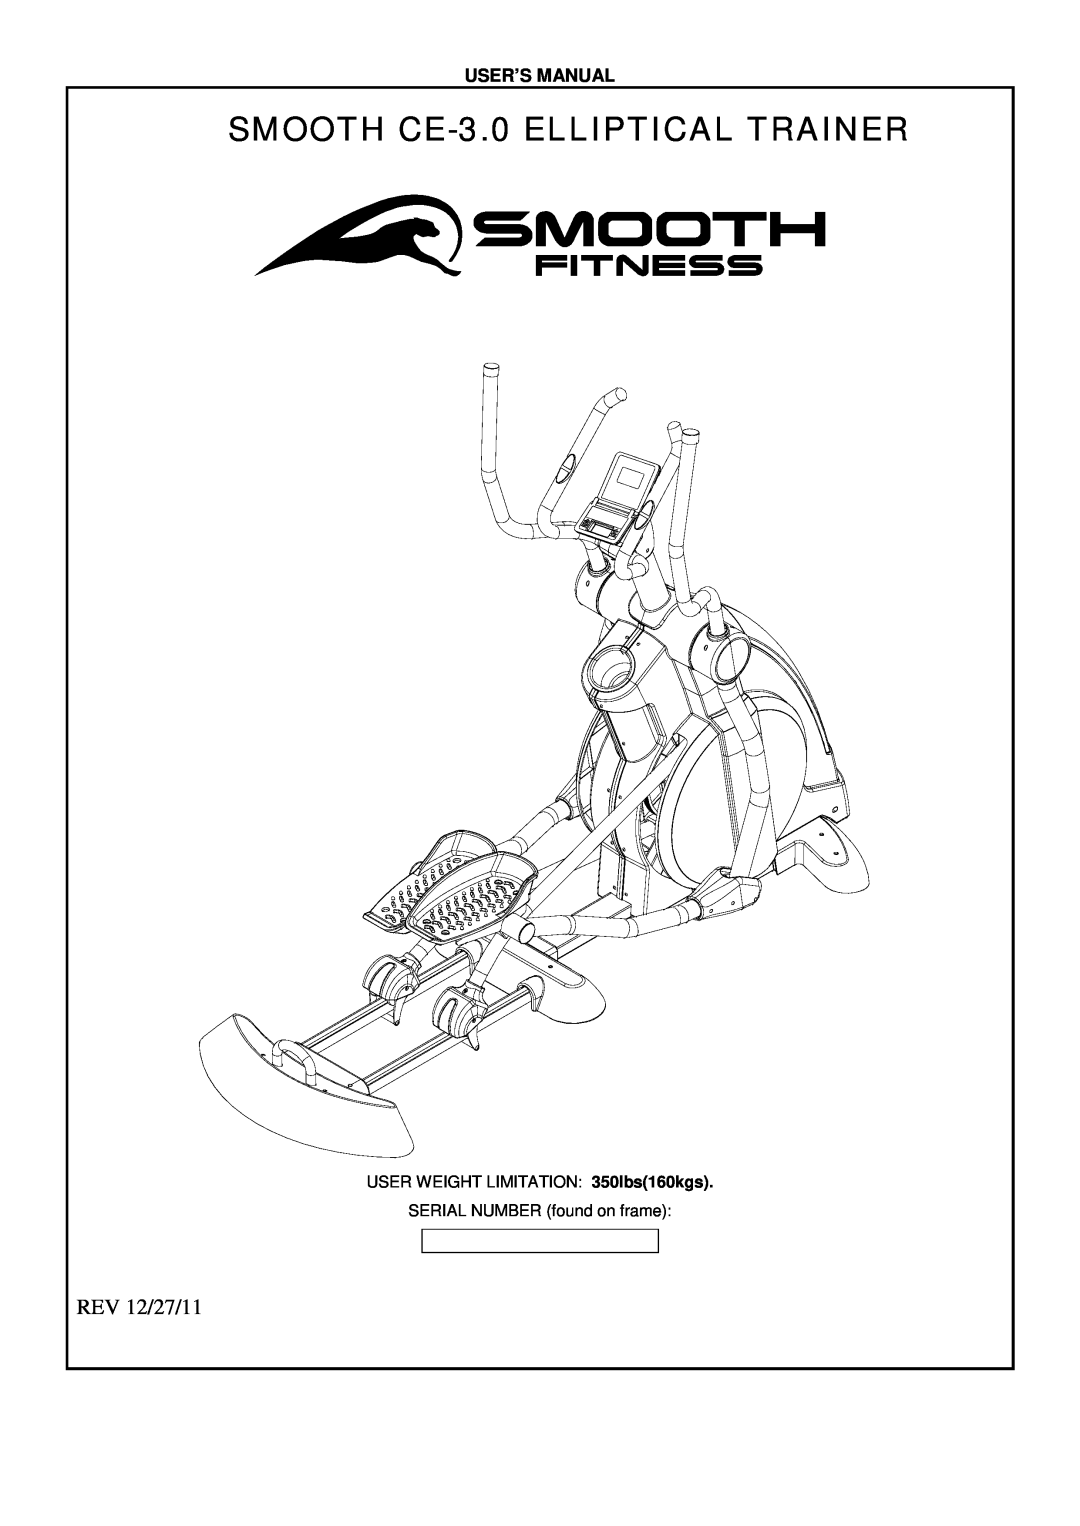 Smooth Fitness user manual REV 12/27/11, SMOOTH CE-3.0 ELLIPTICAL TRAINER, User’S Manual 